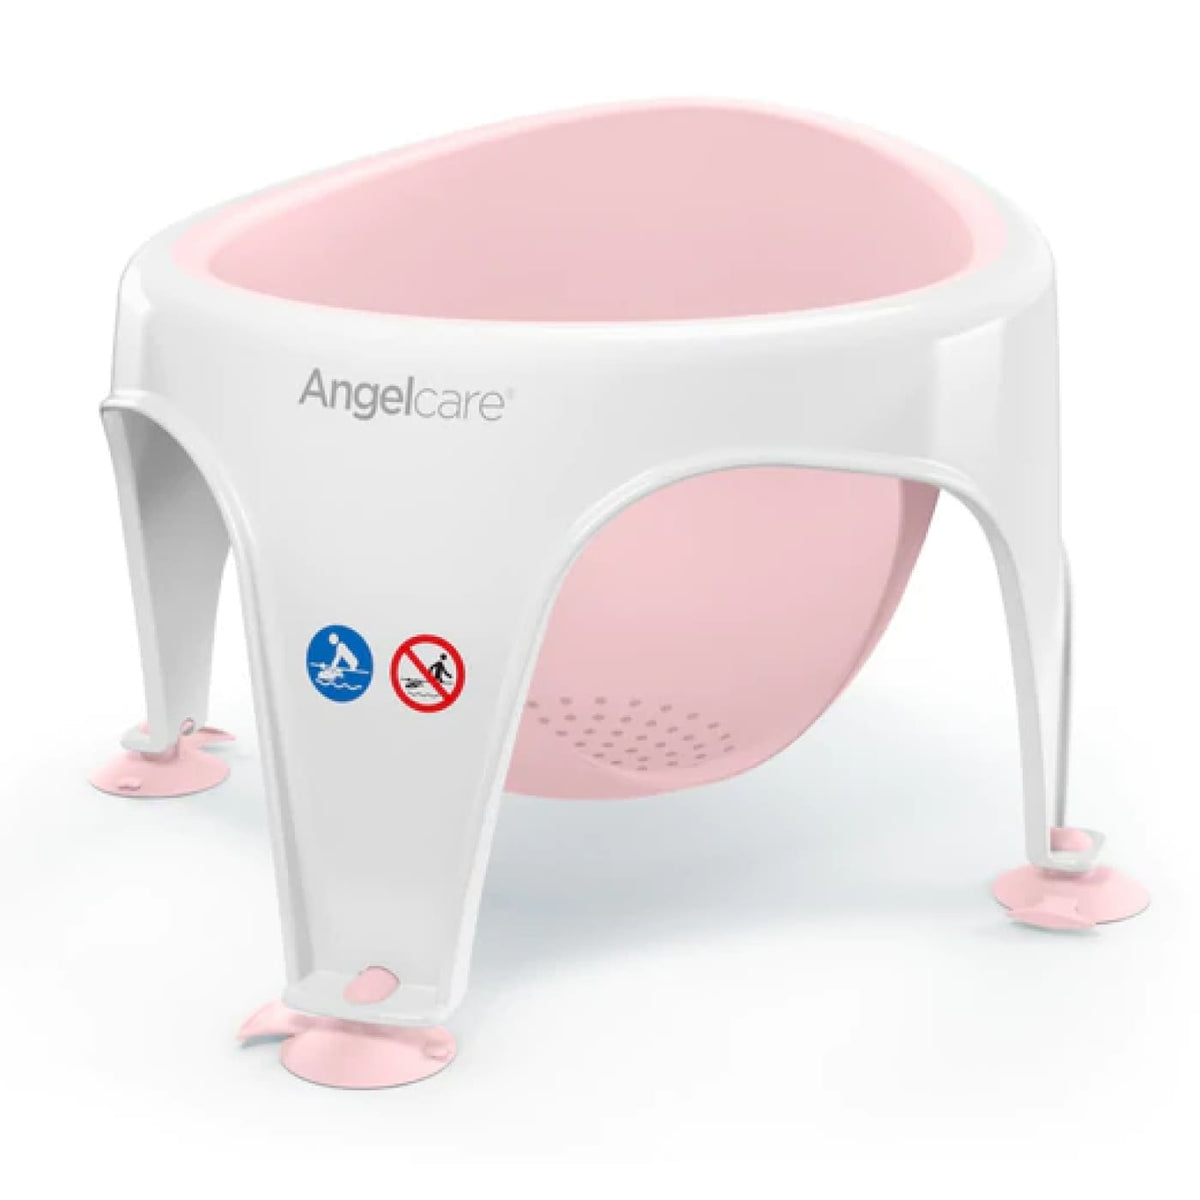 Angelcare Bath Seat Ring - Light Pink - Light Pink - BATHTIME &amp; CHANGING - BATH SUPPORTS/SEATS